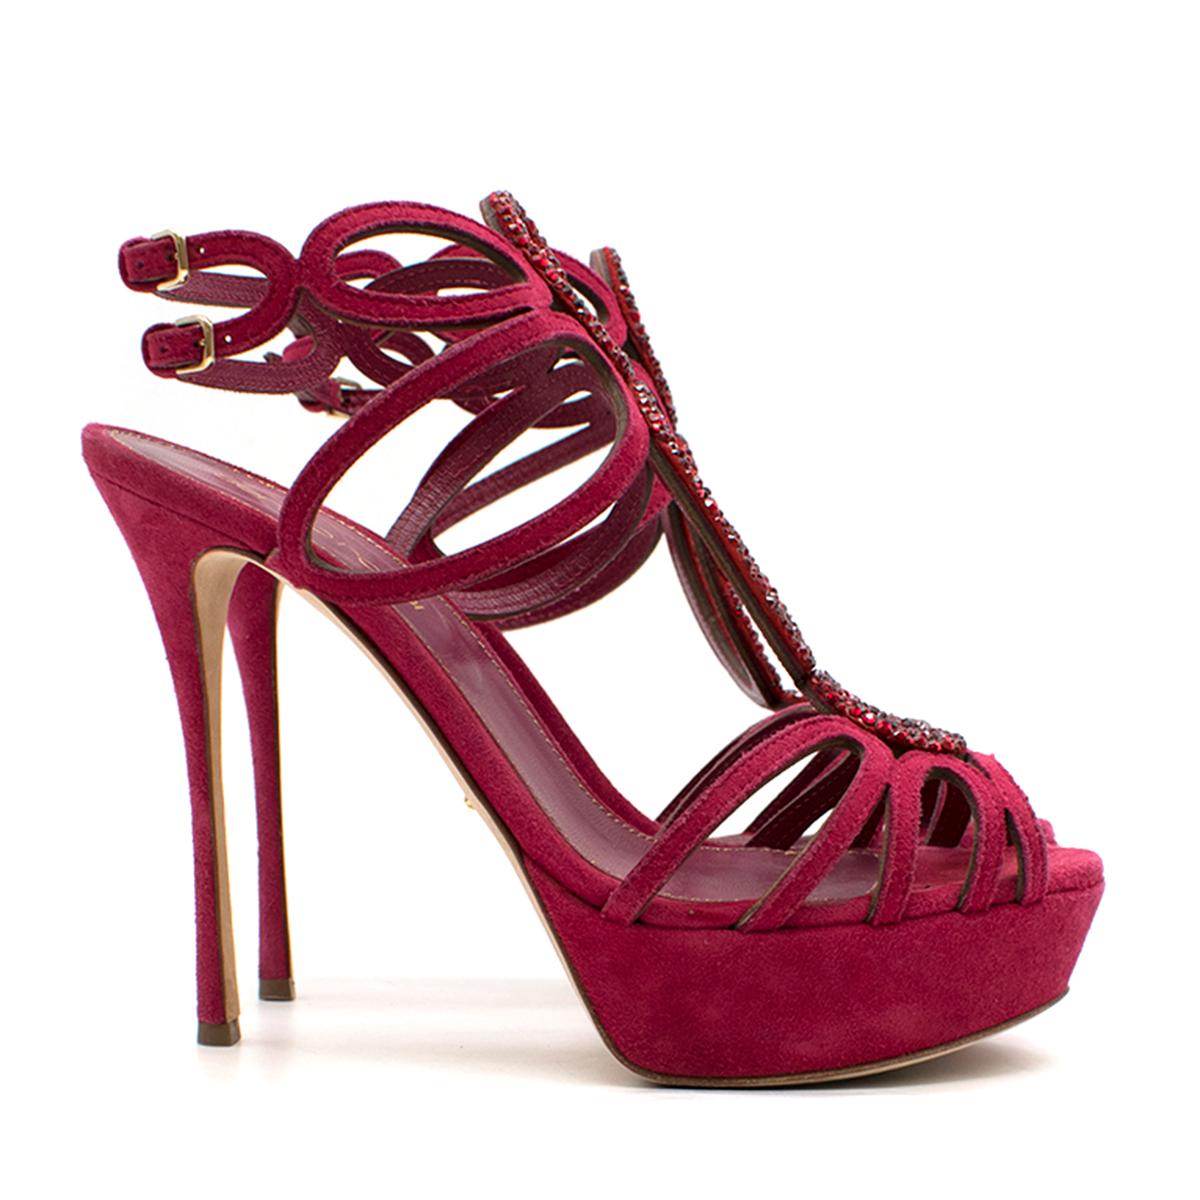 Sergio Rossi Raspberry Rhinestone-embellished Heeled Sandals

- Raspberry suede heeled sandals
- Peep toe
- Front rhinestone-embellished 
- Ankle straps, buckle fastening
- 115mm stiletto heel
- Raspberry leather lining with logo embroidered

Please